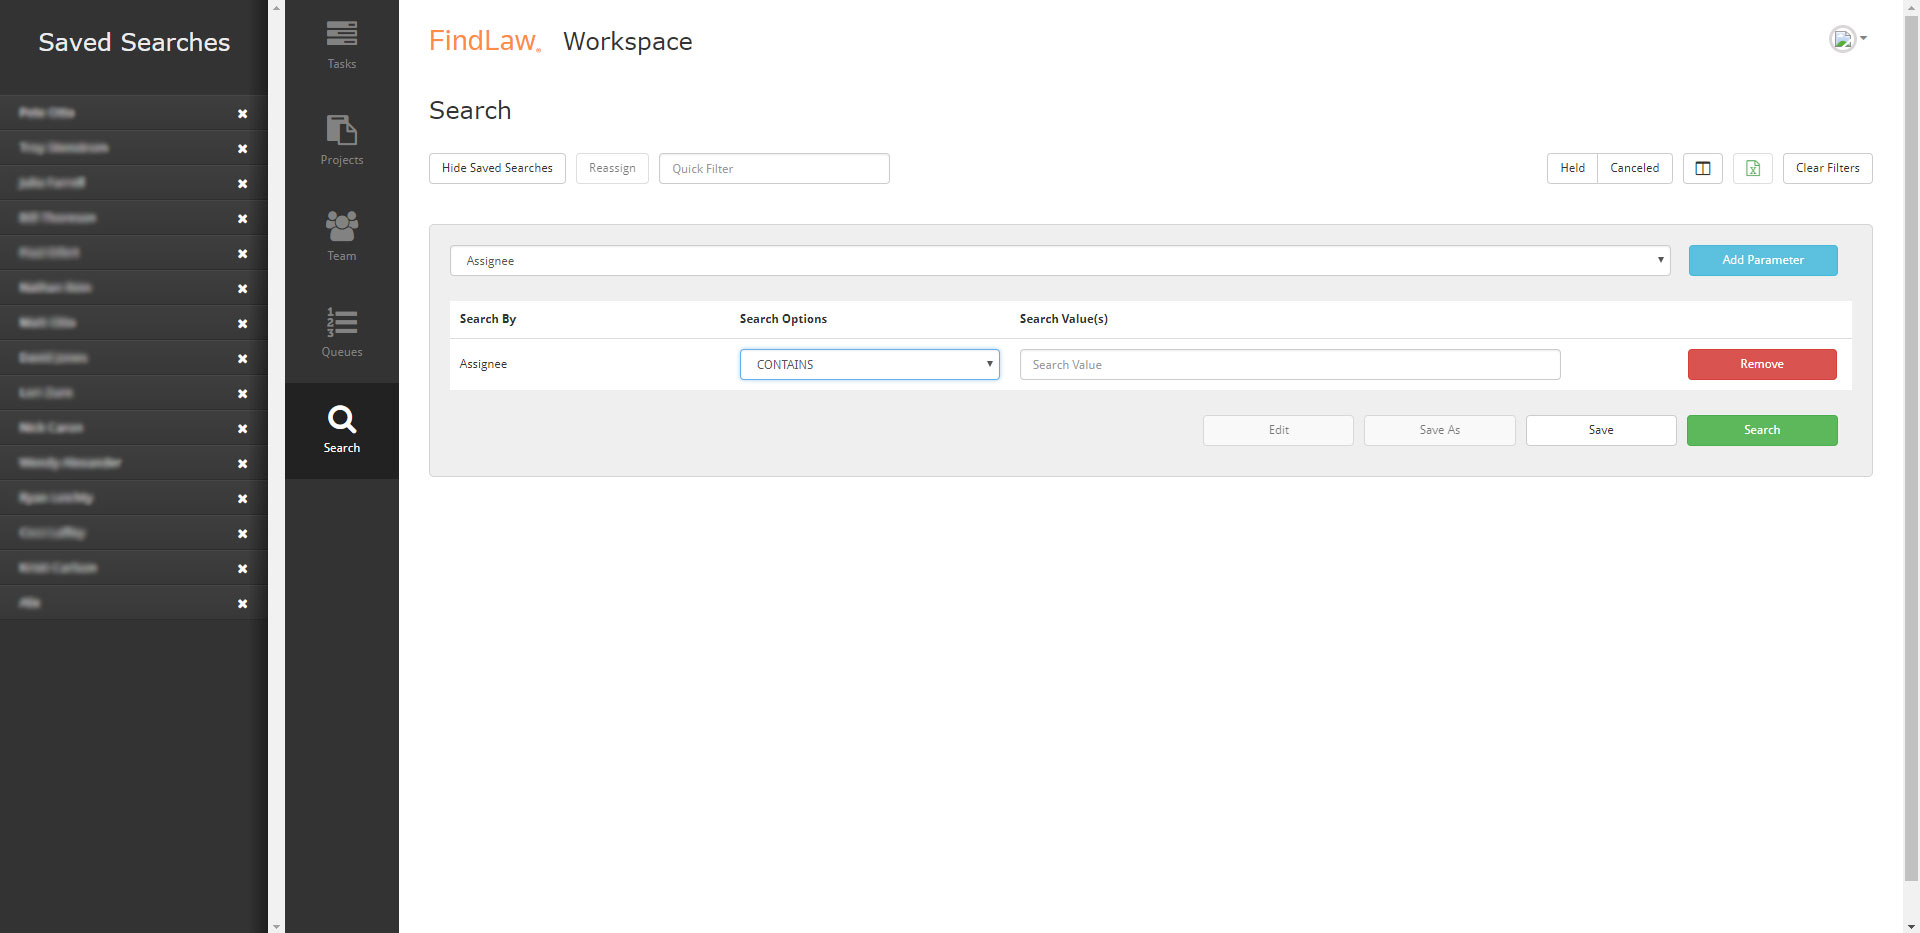 Screenshot of Search Page for Process Management Application